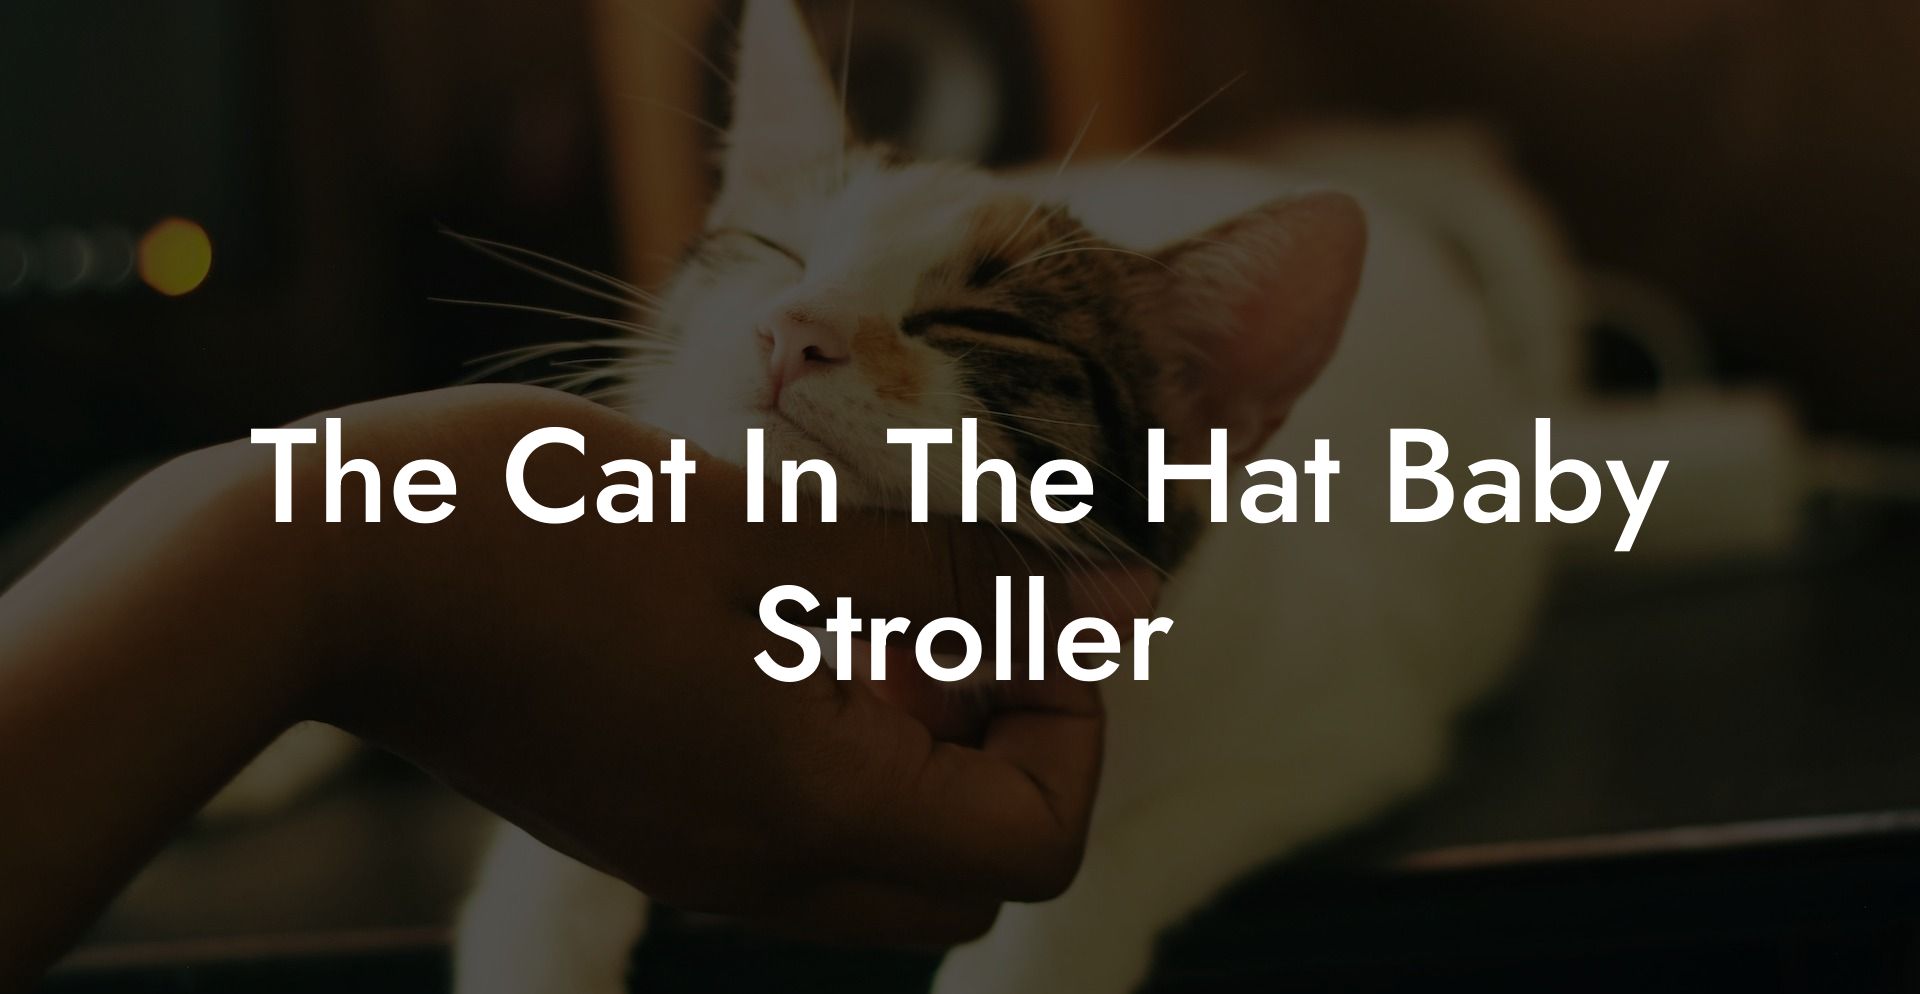 The Cat In The Hat Baby Stroller